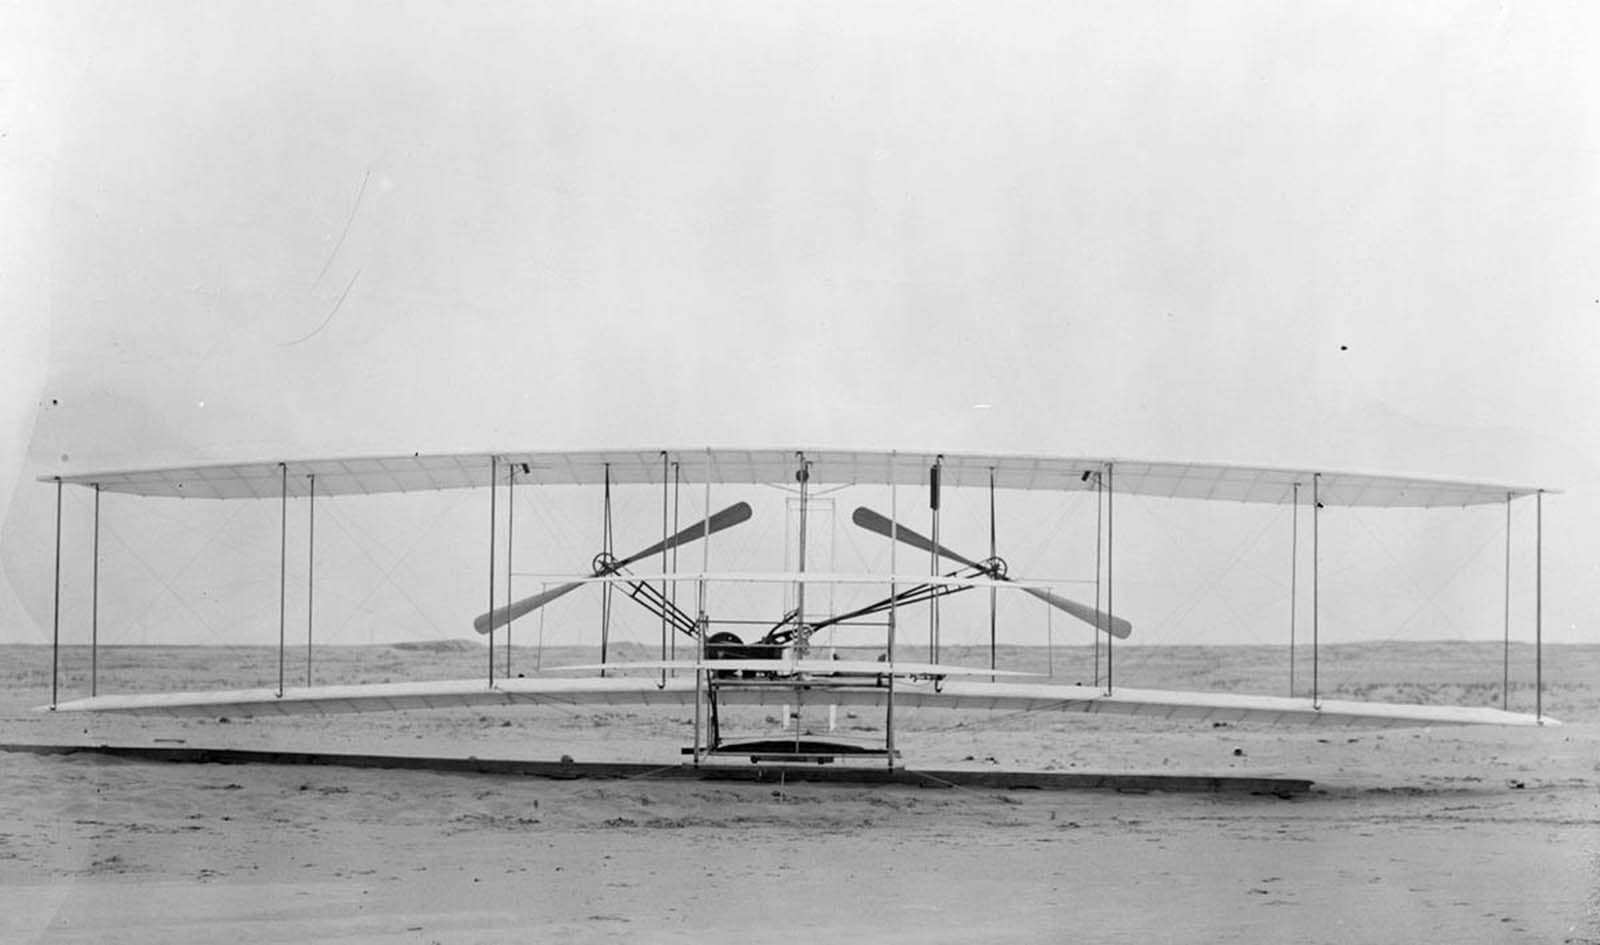 The Wright Flyer I, built in 1903, front view. This machine was the Wright brothers' first powered aircraft. The airplane sported two 8 foot wooden propellers driven by a purpose-built 12 horsepower engine.